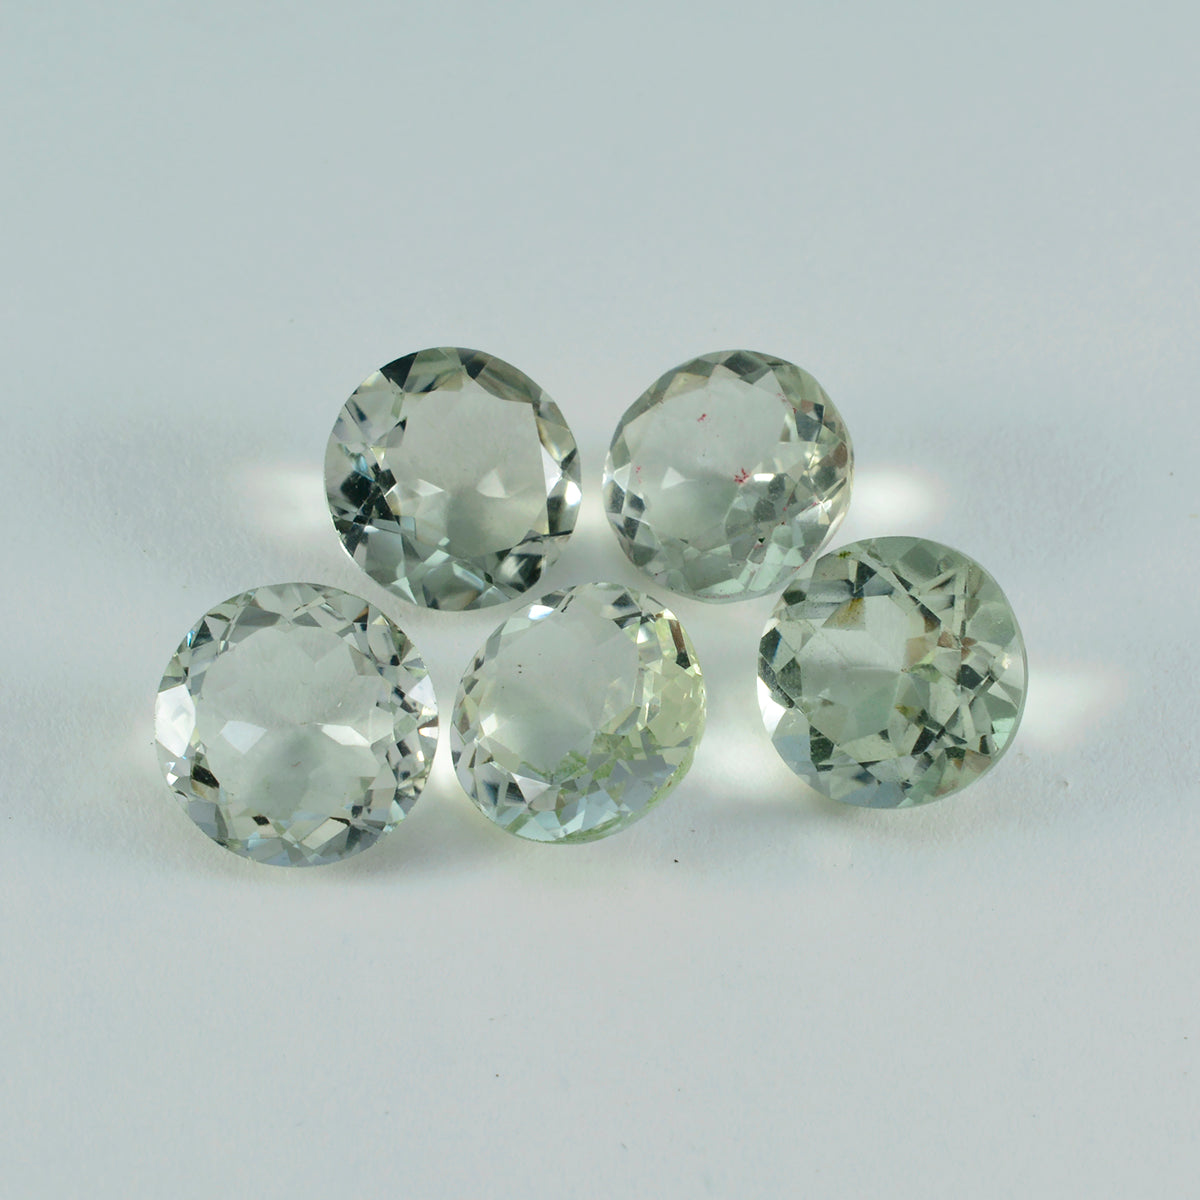 Riyogems 1PC Green Amethyst Faceted 14x14 mm Round Shape startling Quality Loose Stone